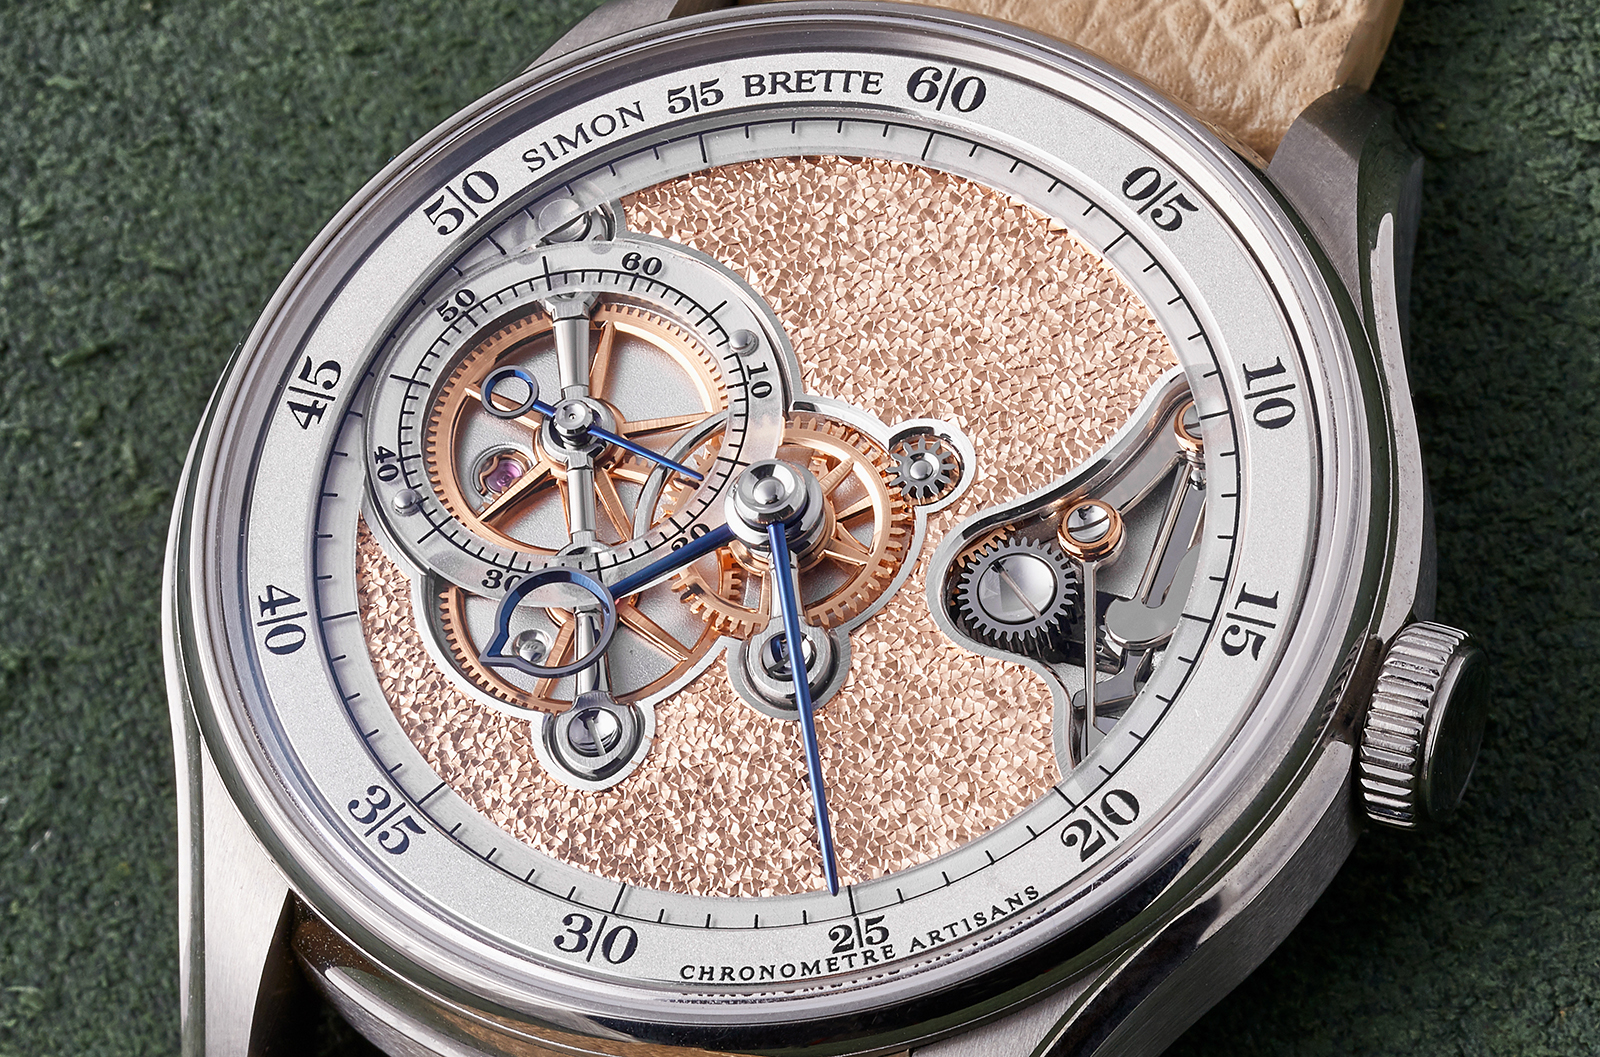 While the movement was designed with symmetry in mind, the dial has been asymmetrically open-worked, revealing the hour wheel, third and fourth wheels on the left and the keyless works in the opening on the right